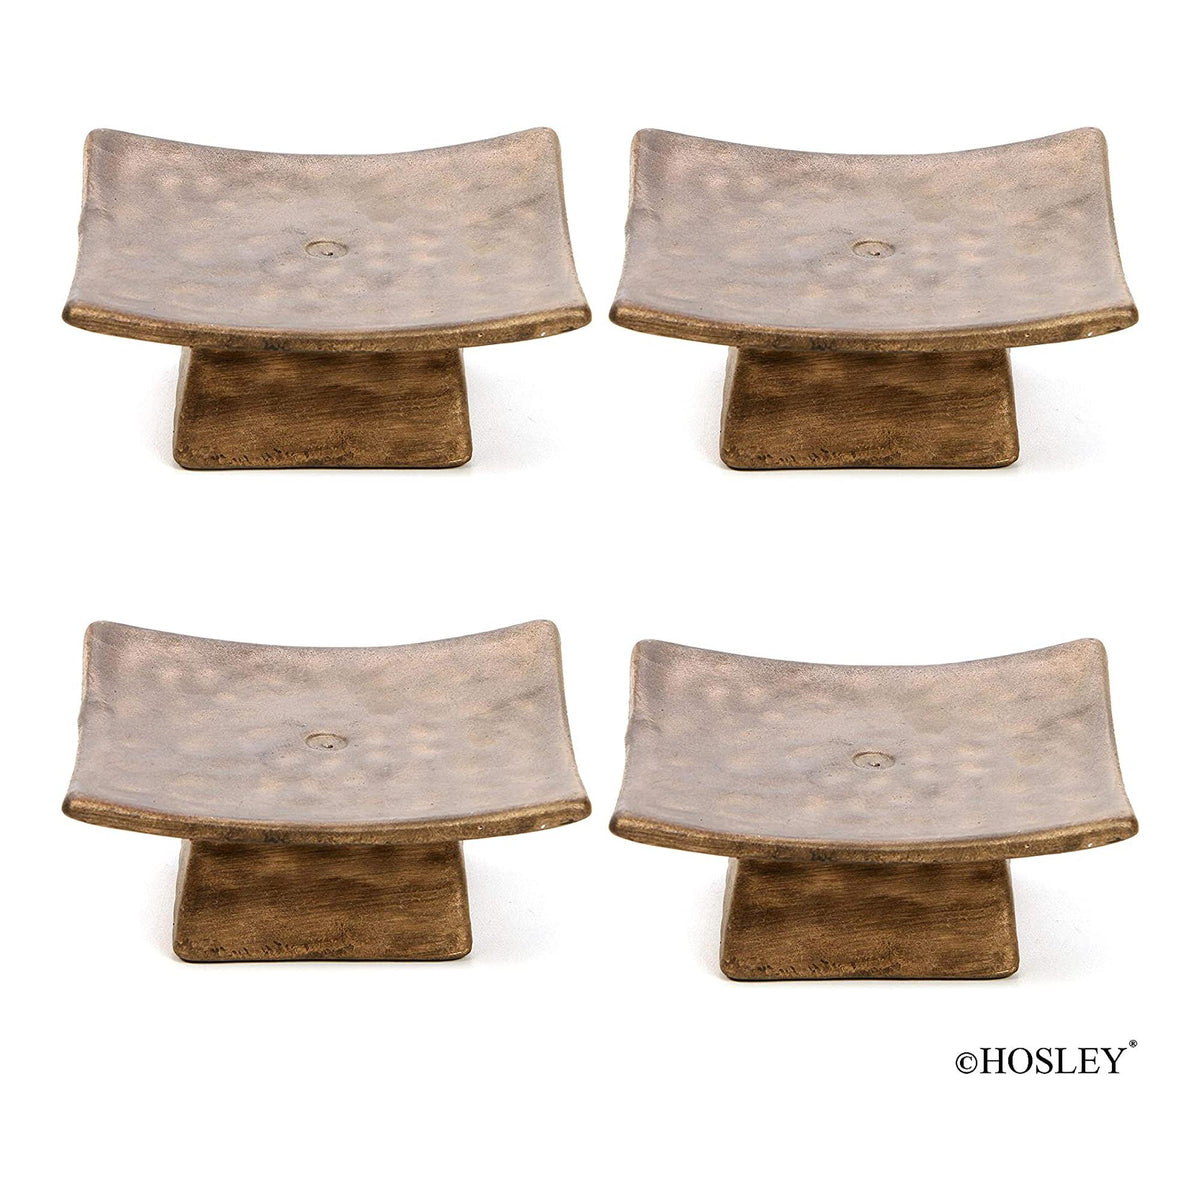 HOSLEY®  Ceramic Incense Cone or Pillar Candle Holders, Set of 4, 5.5 inches Long each, Square